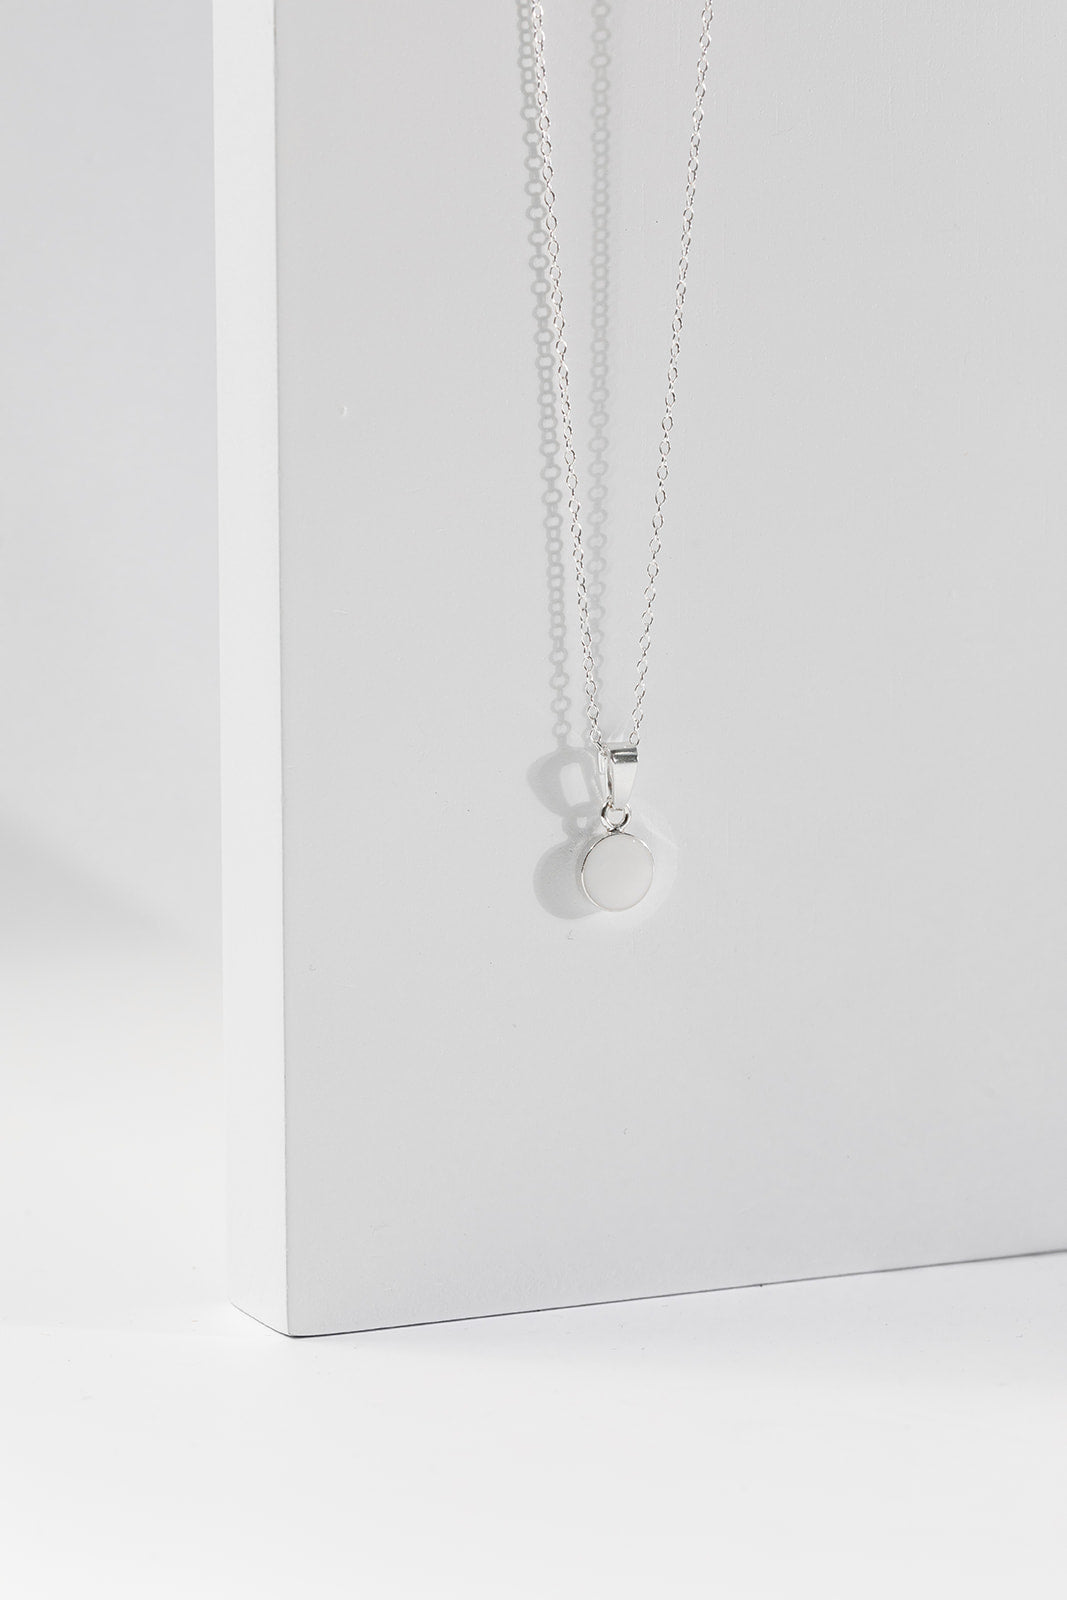 Simple Breastmilk Pendant Necklace - White Gold